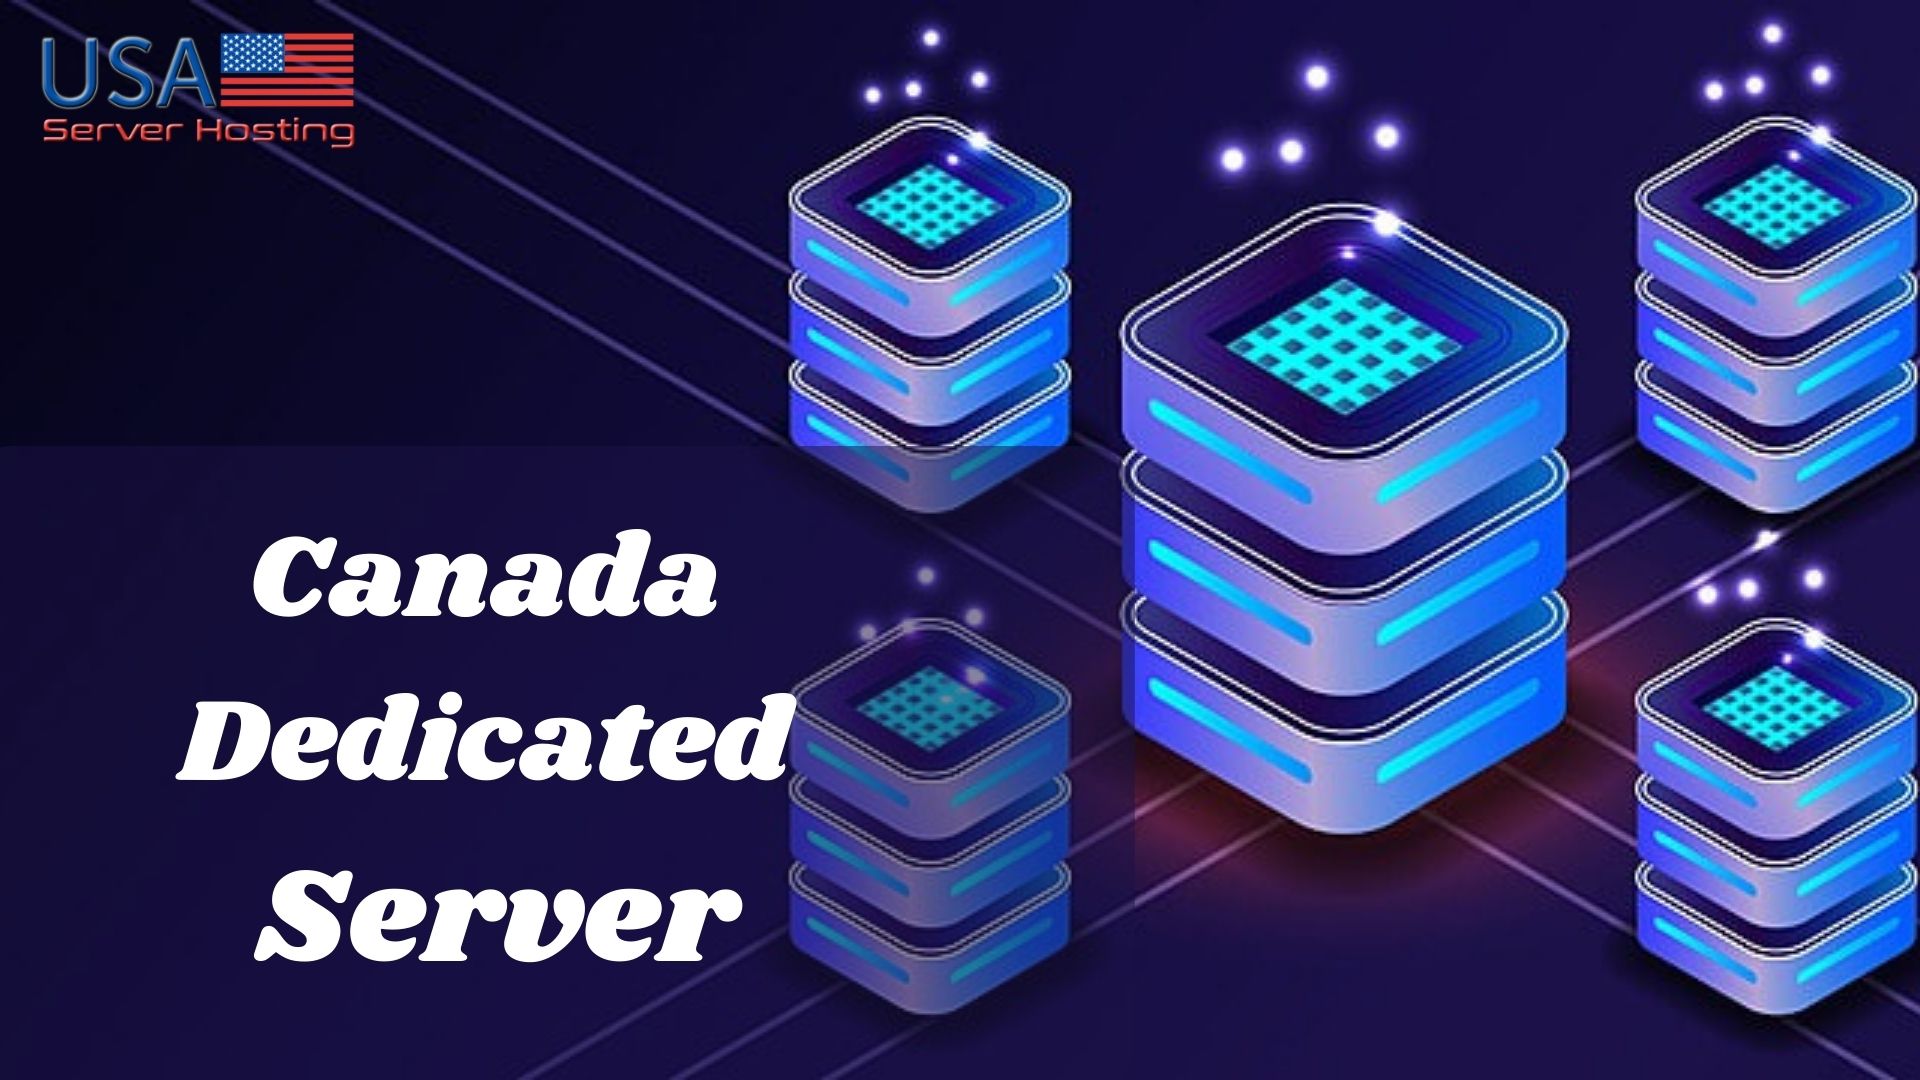 Get the Canada Dedicated Server at Your Doorstep